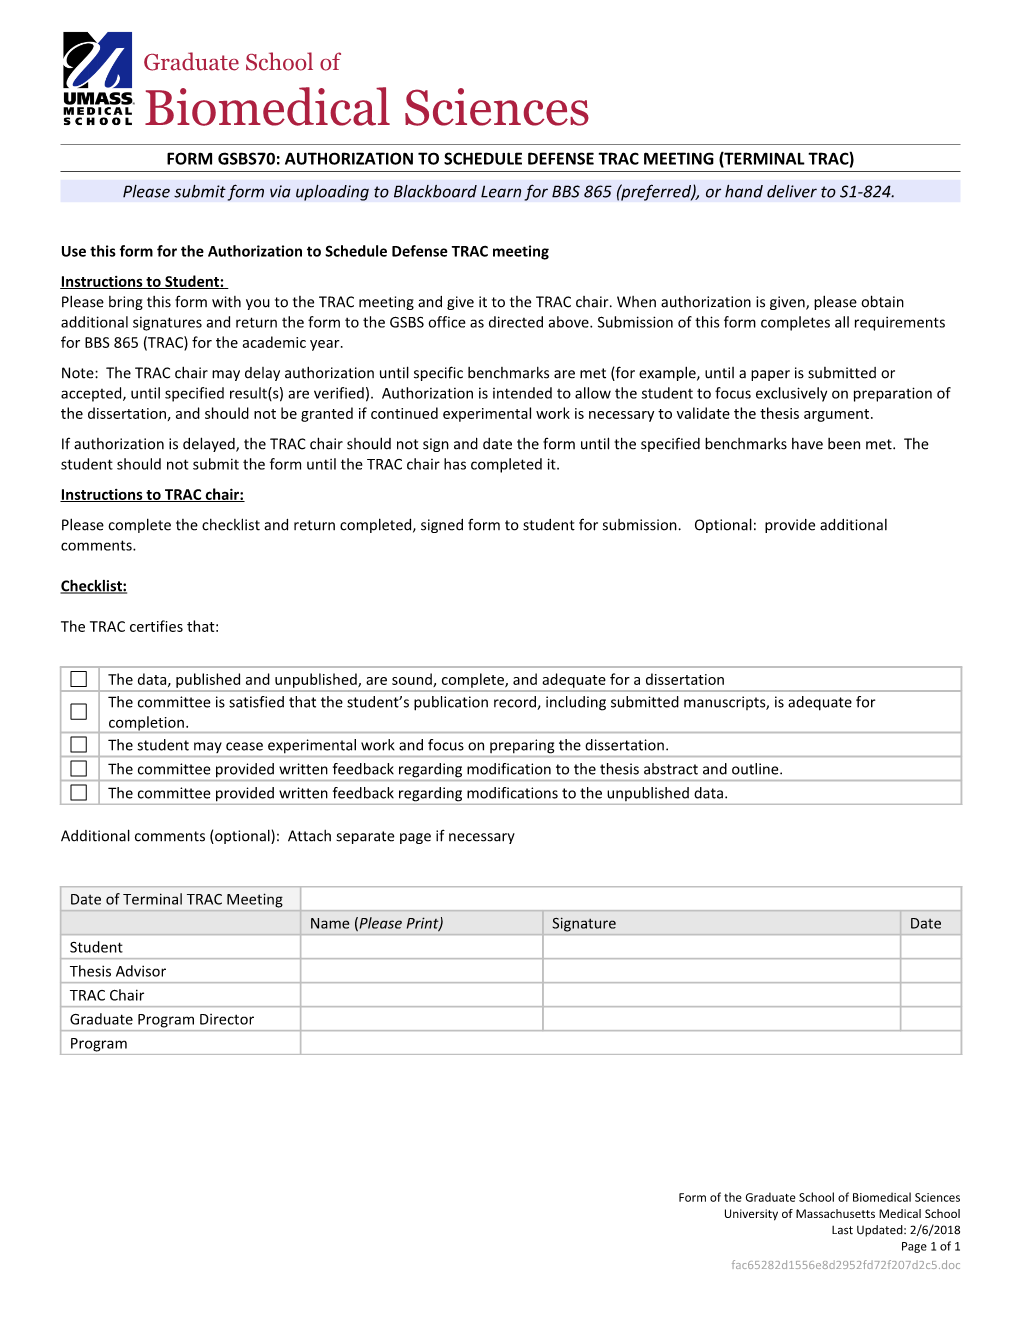 Form Gsbs70: Authorization to Schedule Defense Trac Meeting (Terminal Trac)